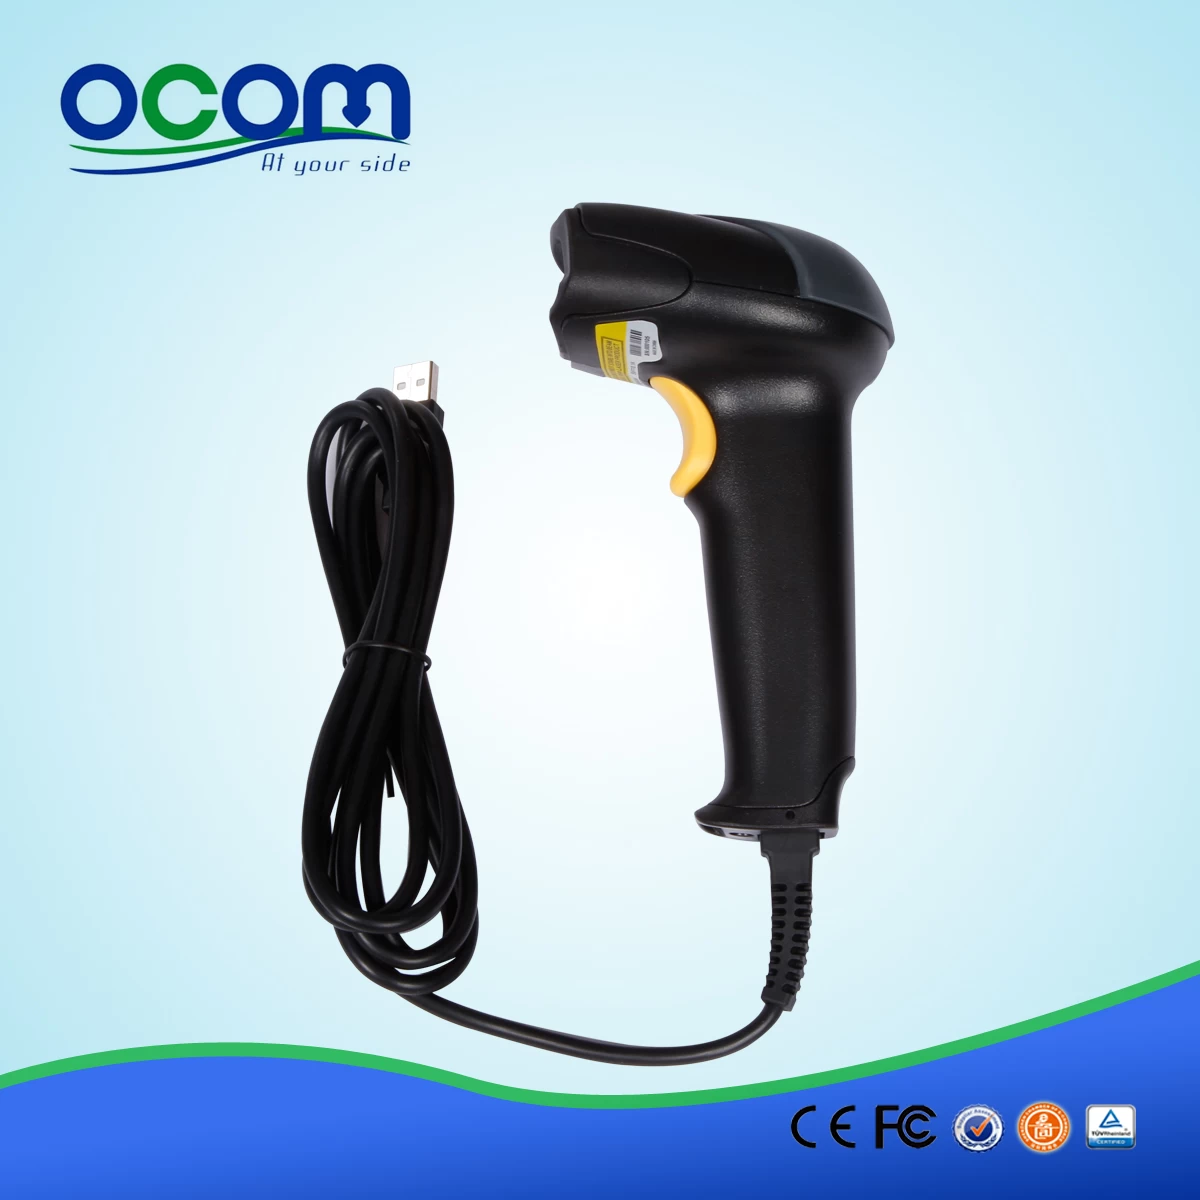 2015 hot fixed mount barcode scanner mini usb, barcode scanner parts